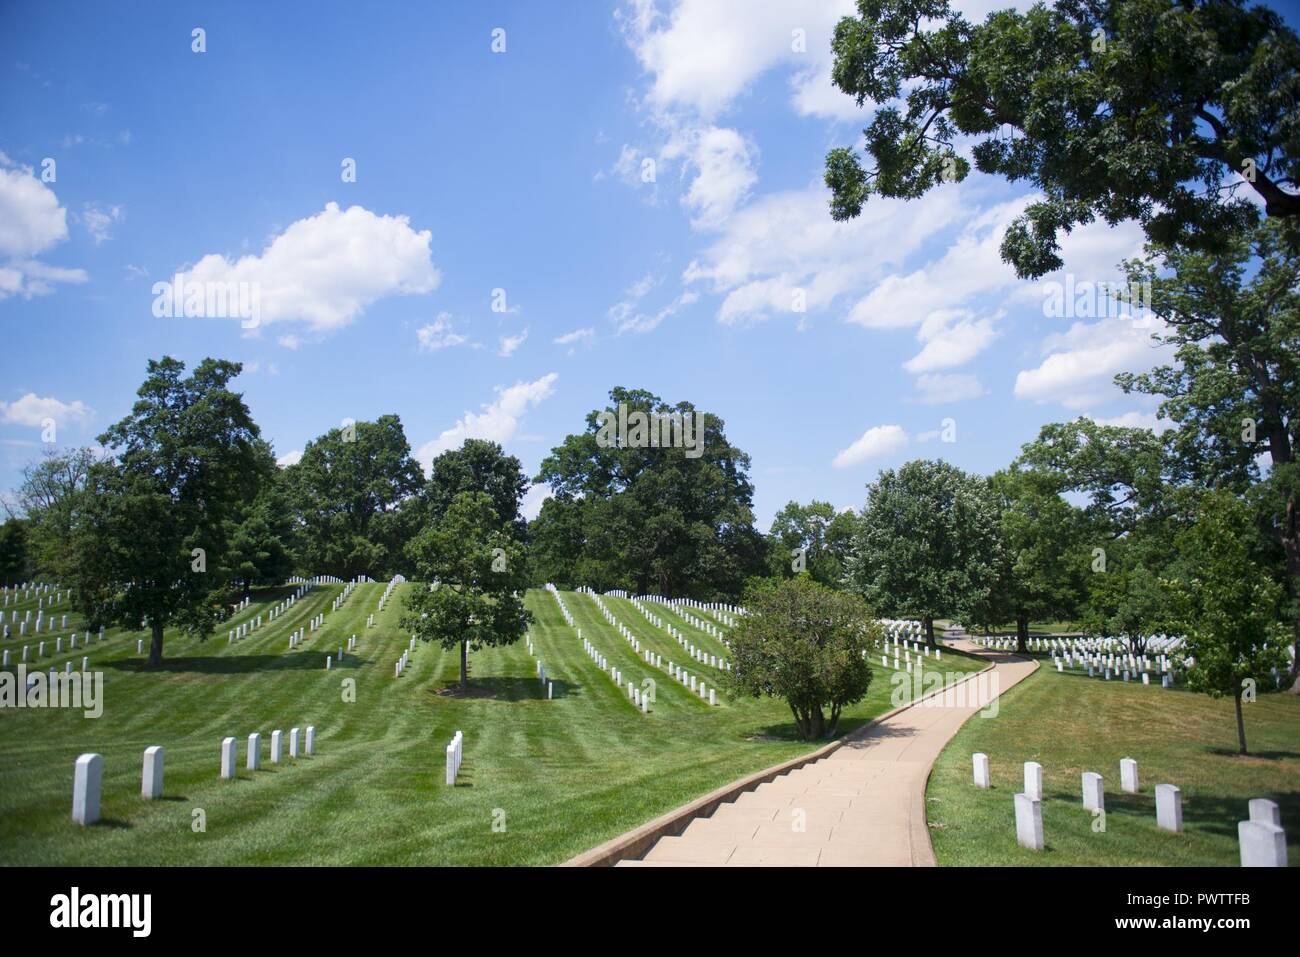 The first day of summer in Section 36 of Arlington National Cemetery, Arlington, Va., June 21, 2017.  The cemetery’s 651 acres is the final resting place for more than 400,000 active duty service members, veterans and their families. Stock Photo